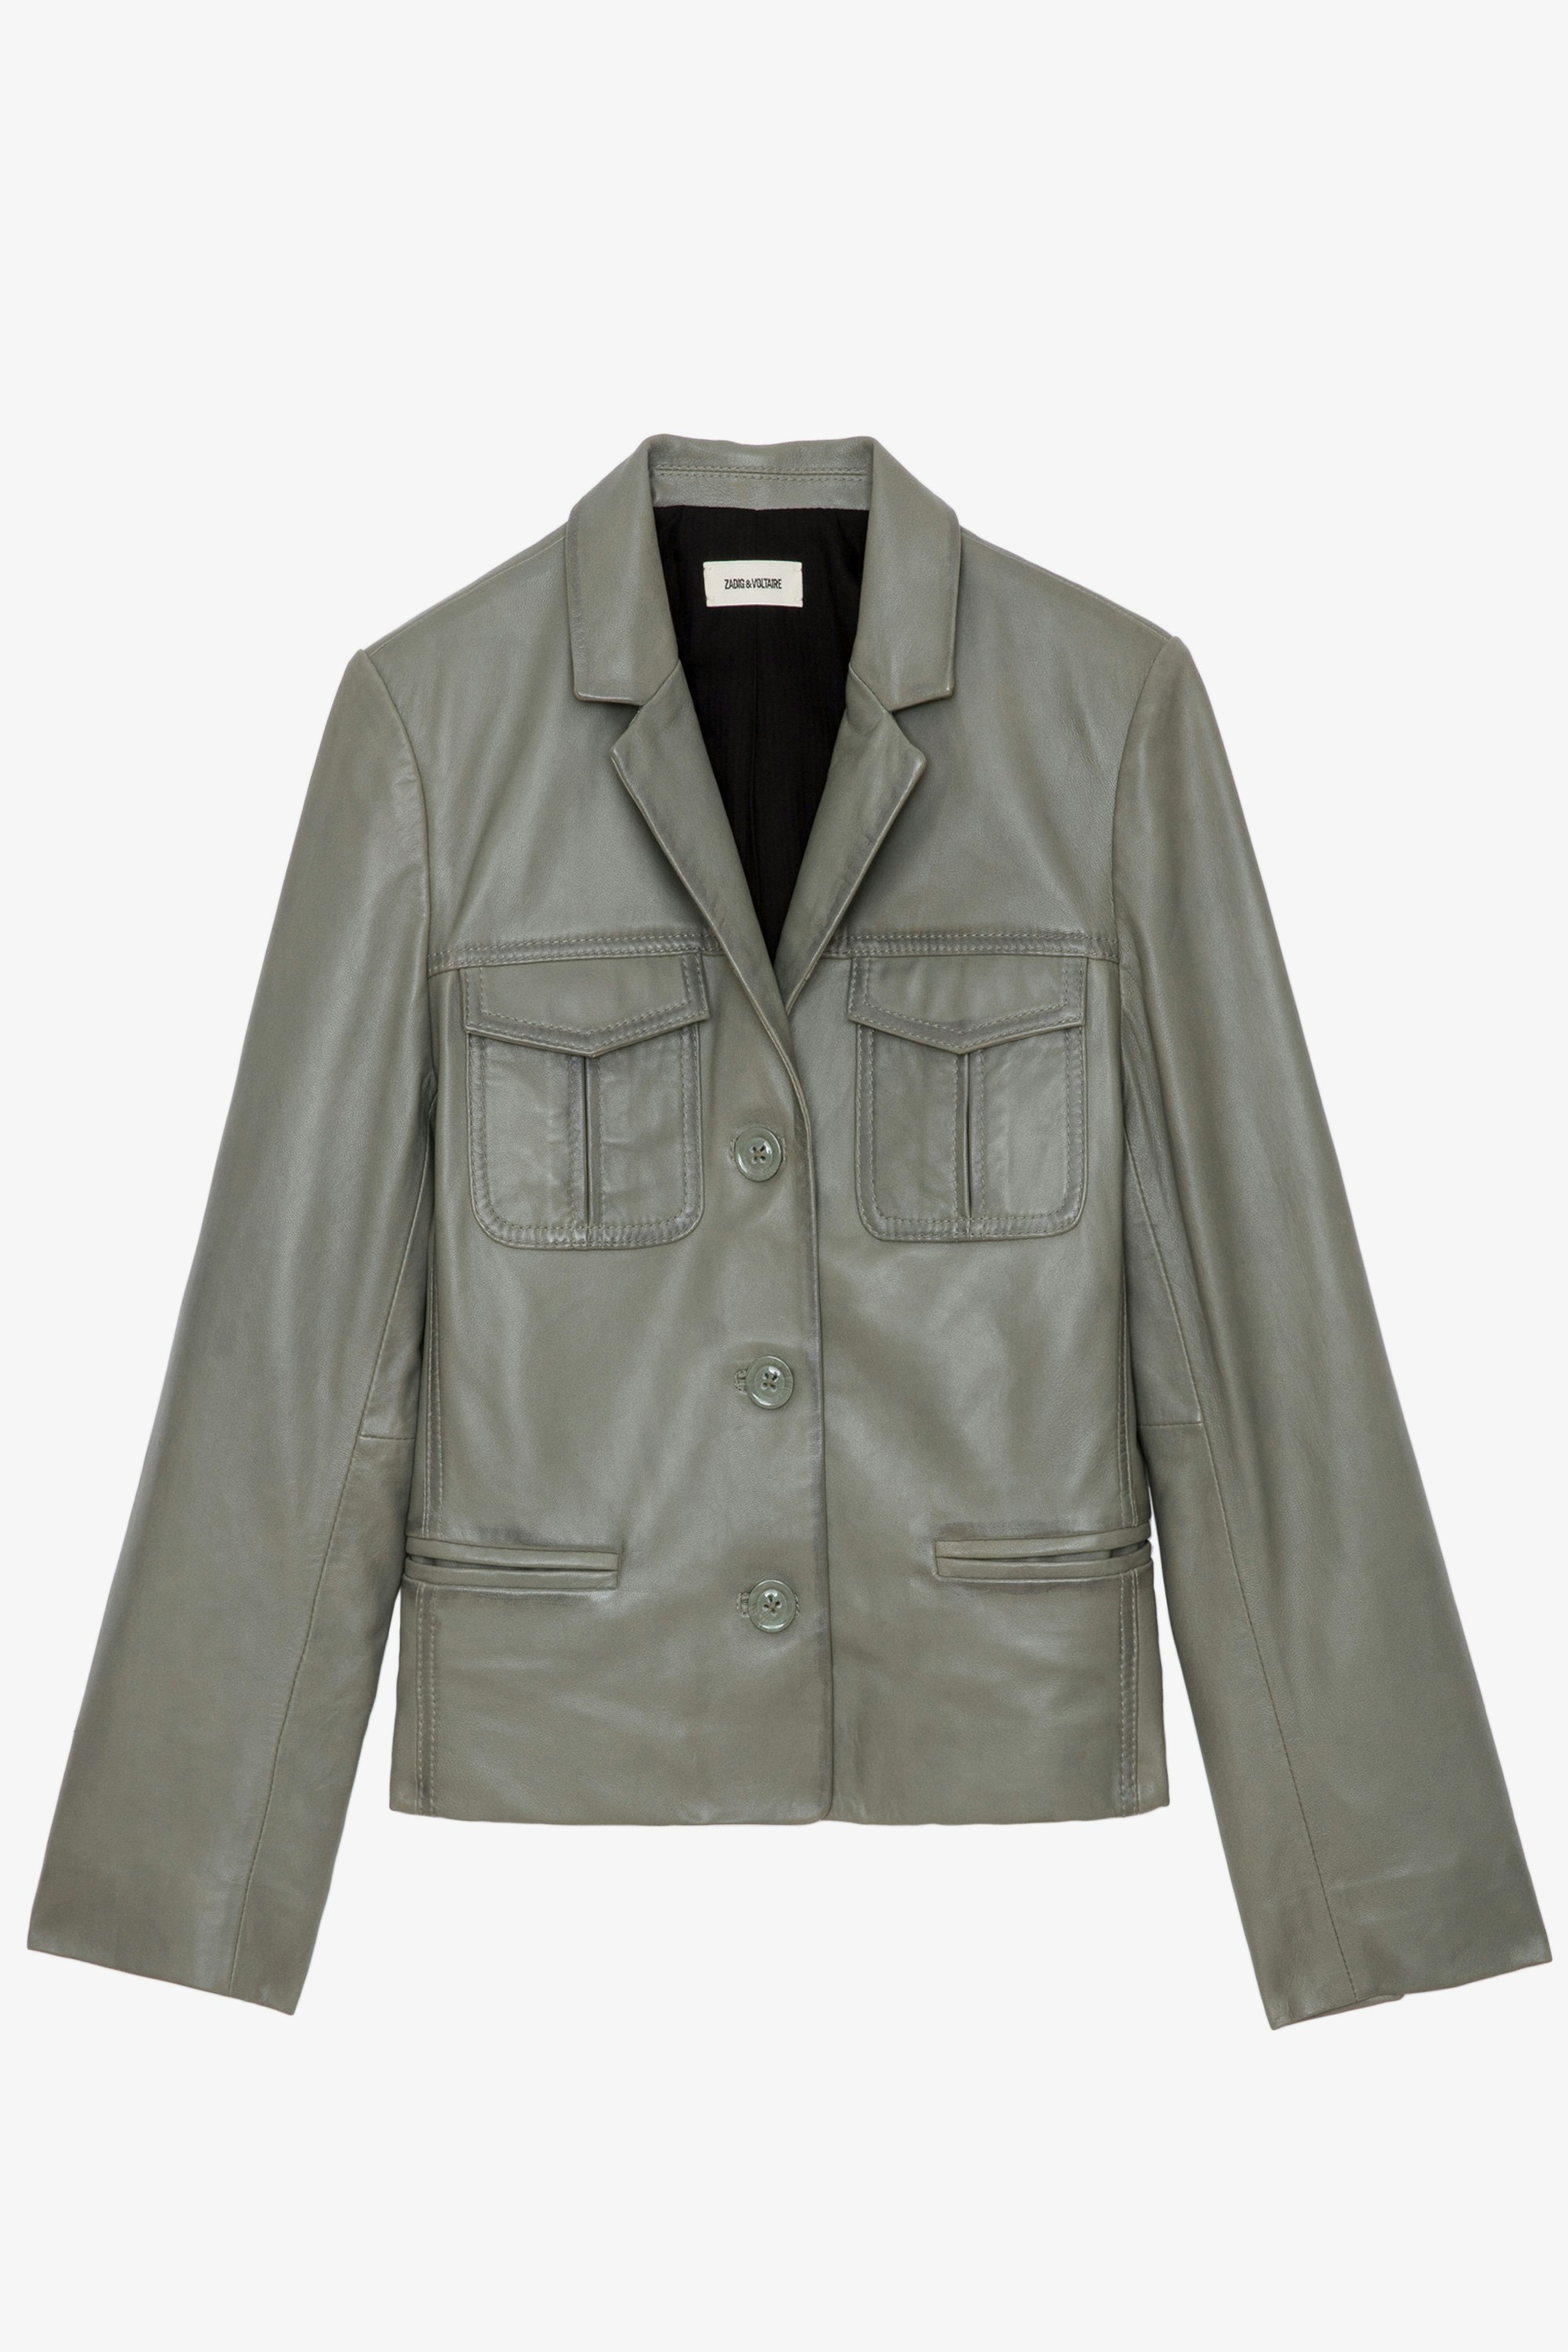 Liams Leather Jacket - Khaki smooth leather fitted jacket with button closure and pockets.